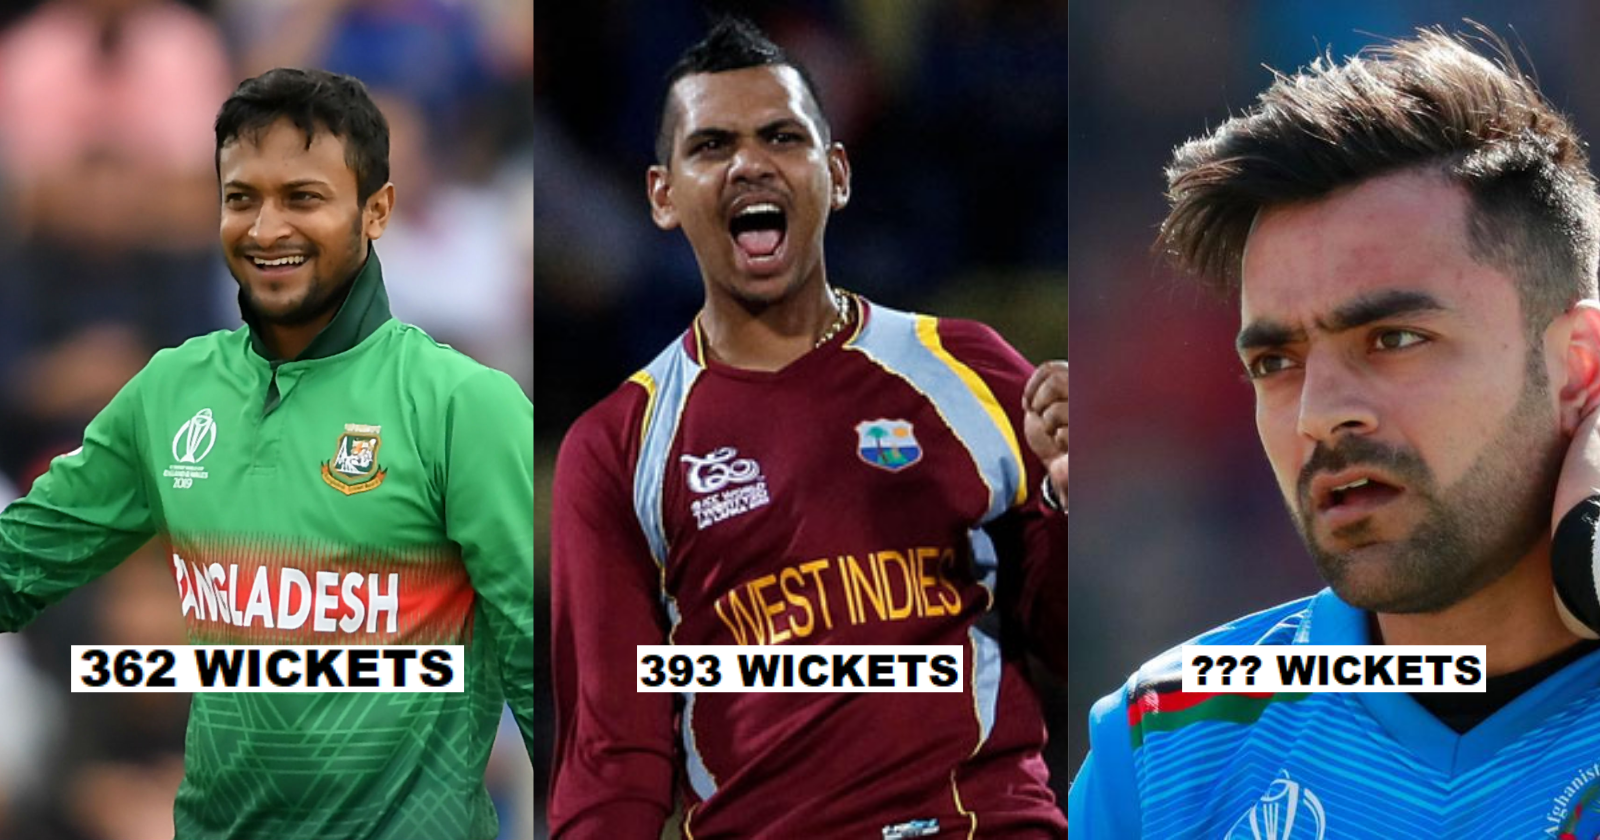 5 Bowlers With The Most Wickets In T20 Cricket